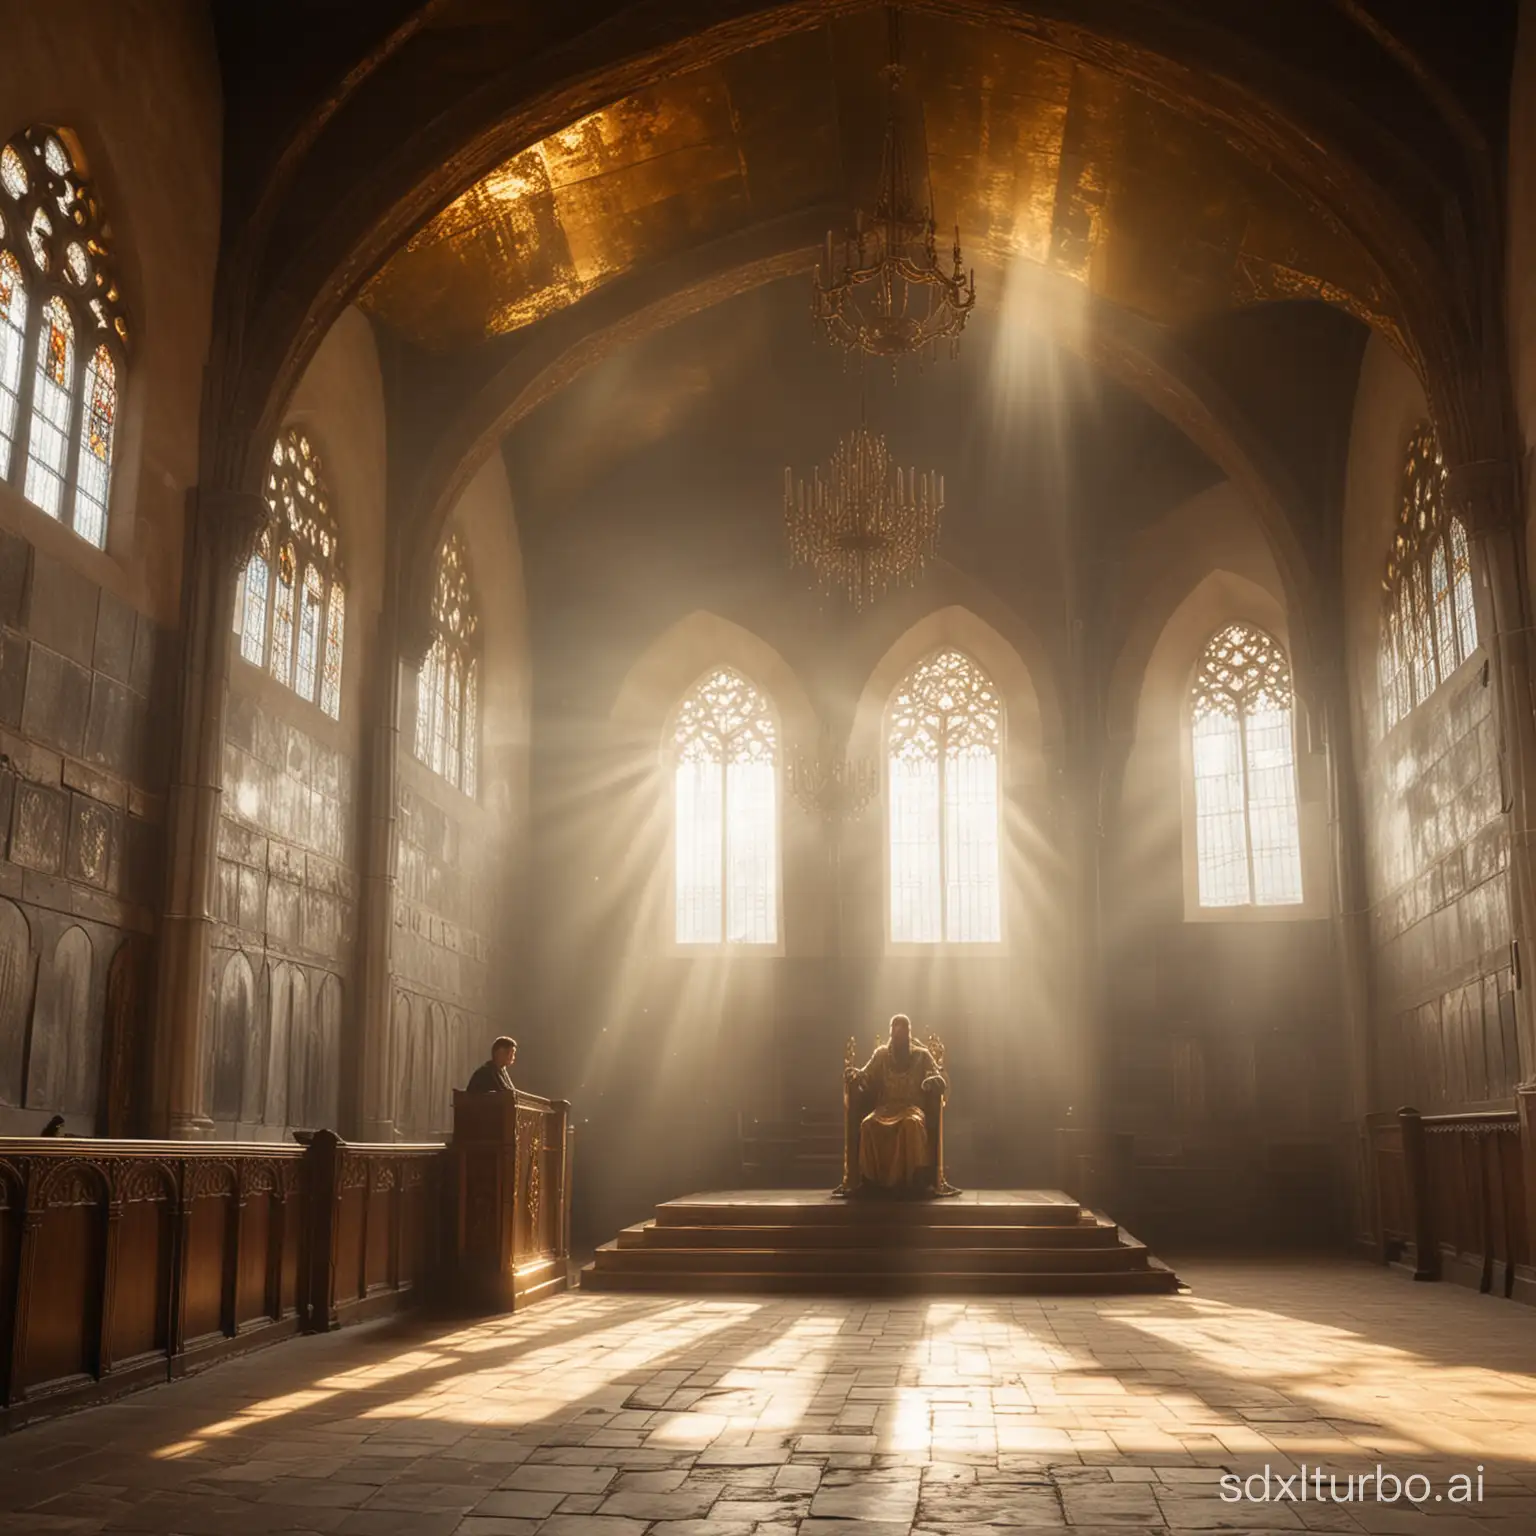 Medieval-King-on-Golden-Throne-in-Sunlit-Church-Hall